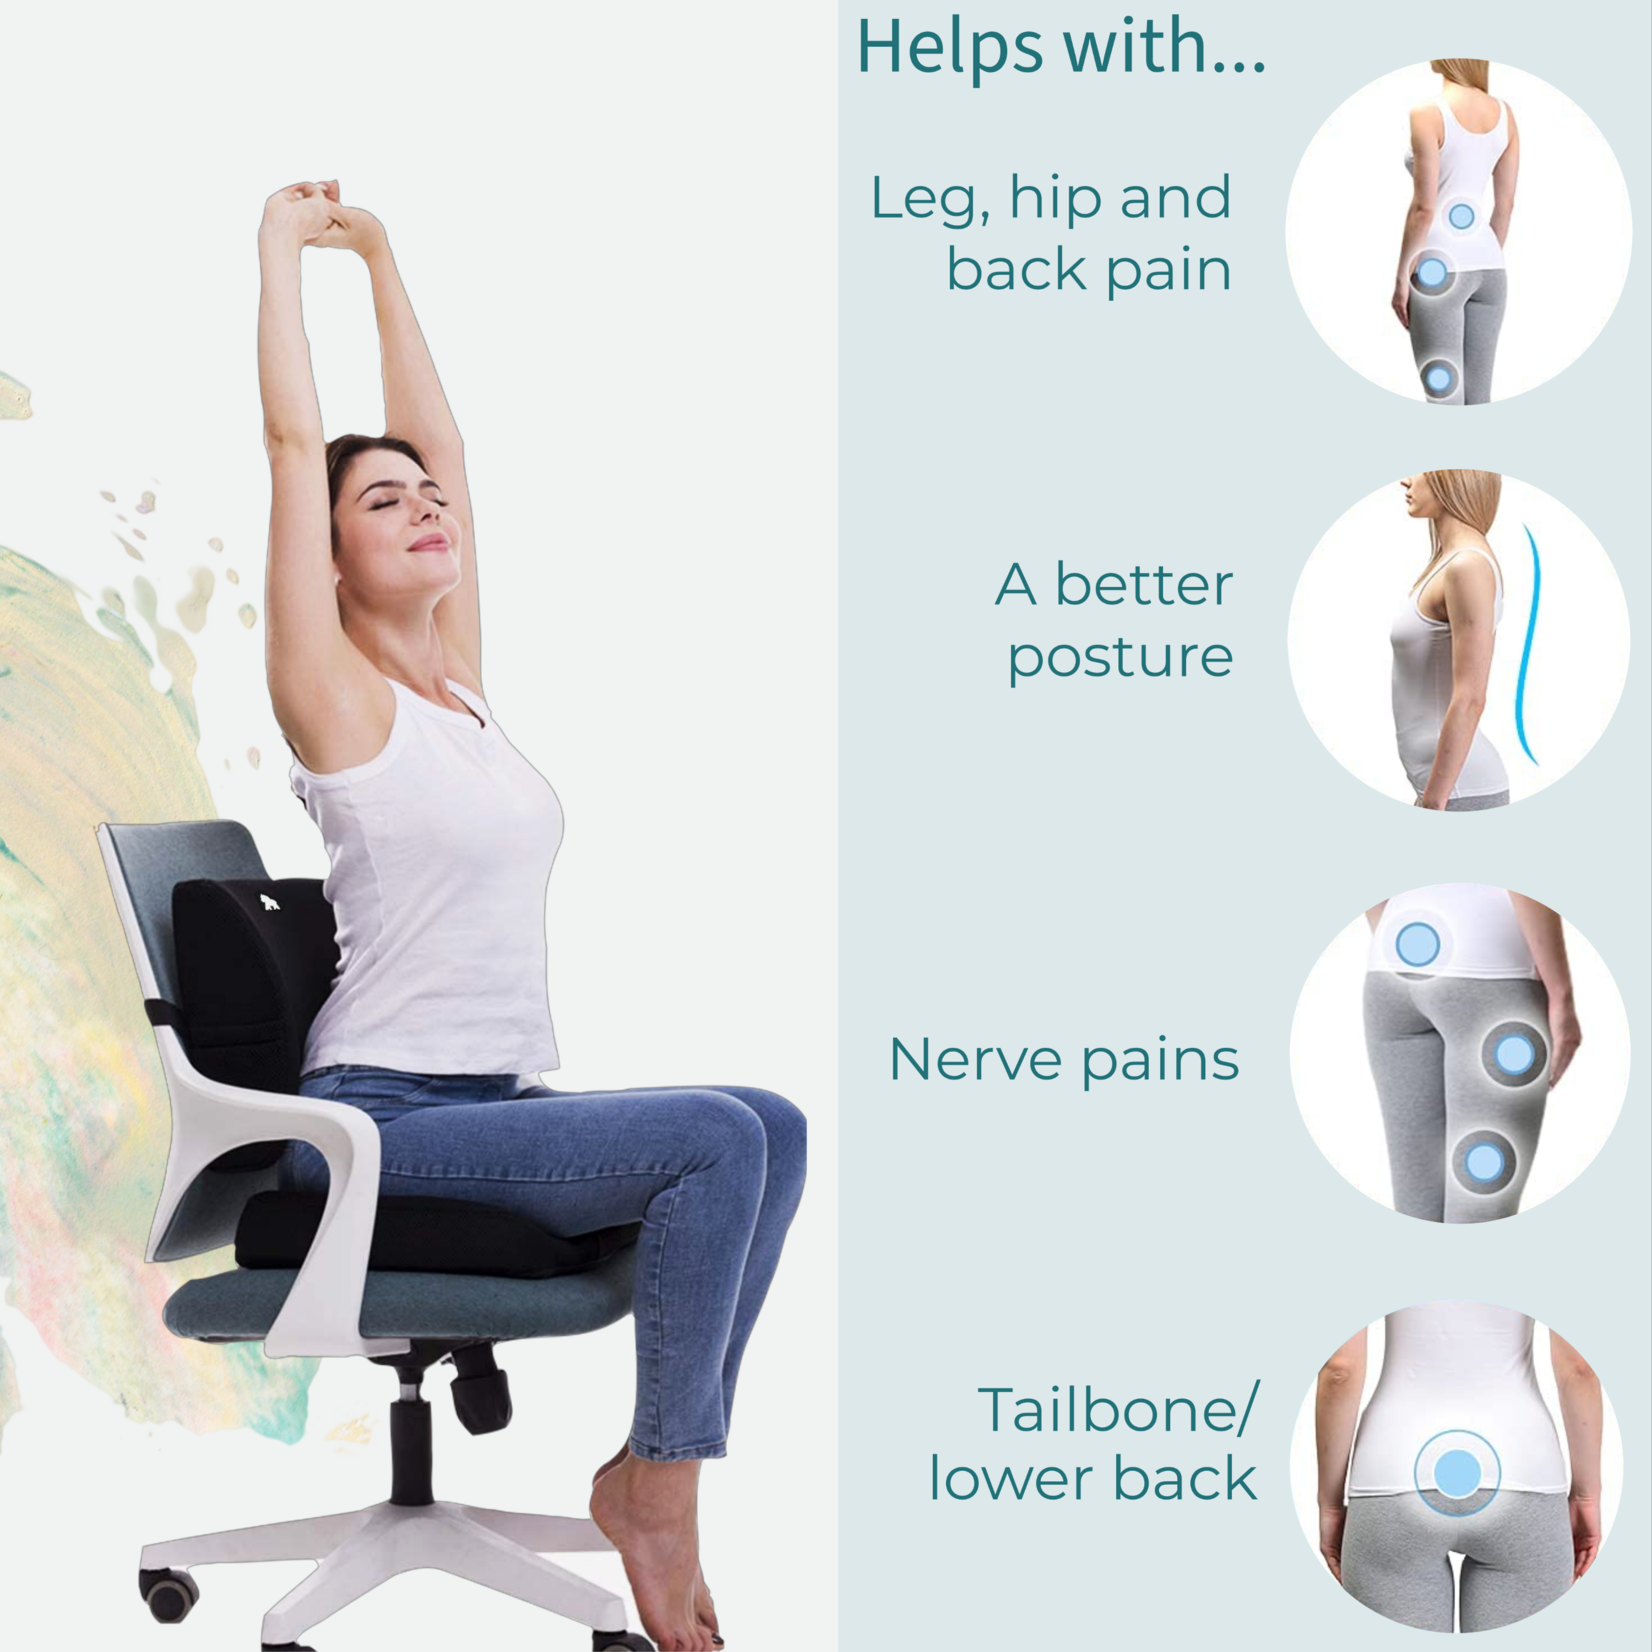 Back Support Chair Posture Corrector leg Support for Computer Chair